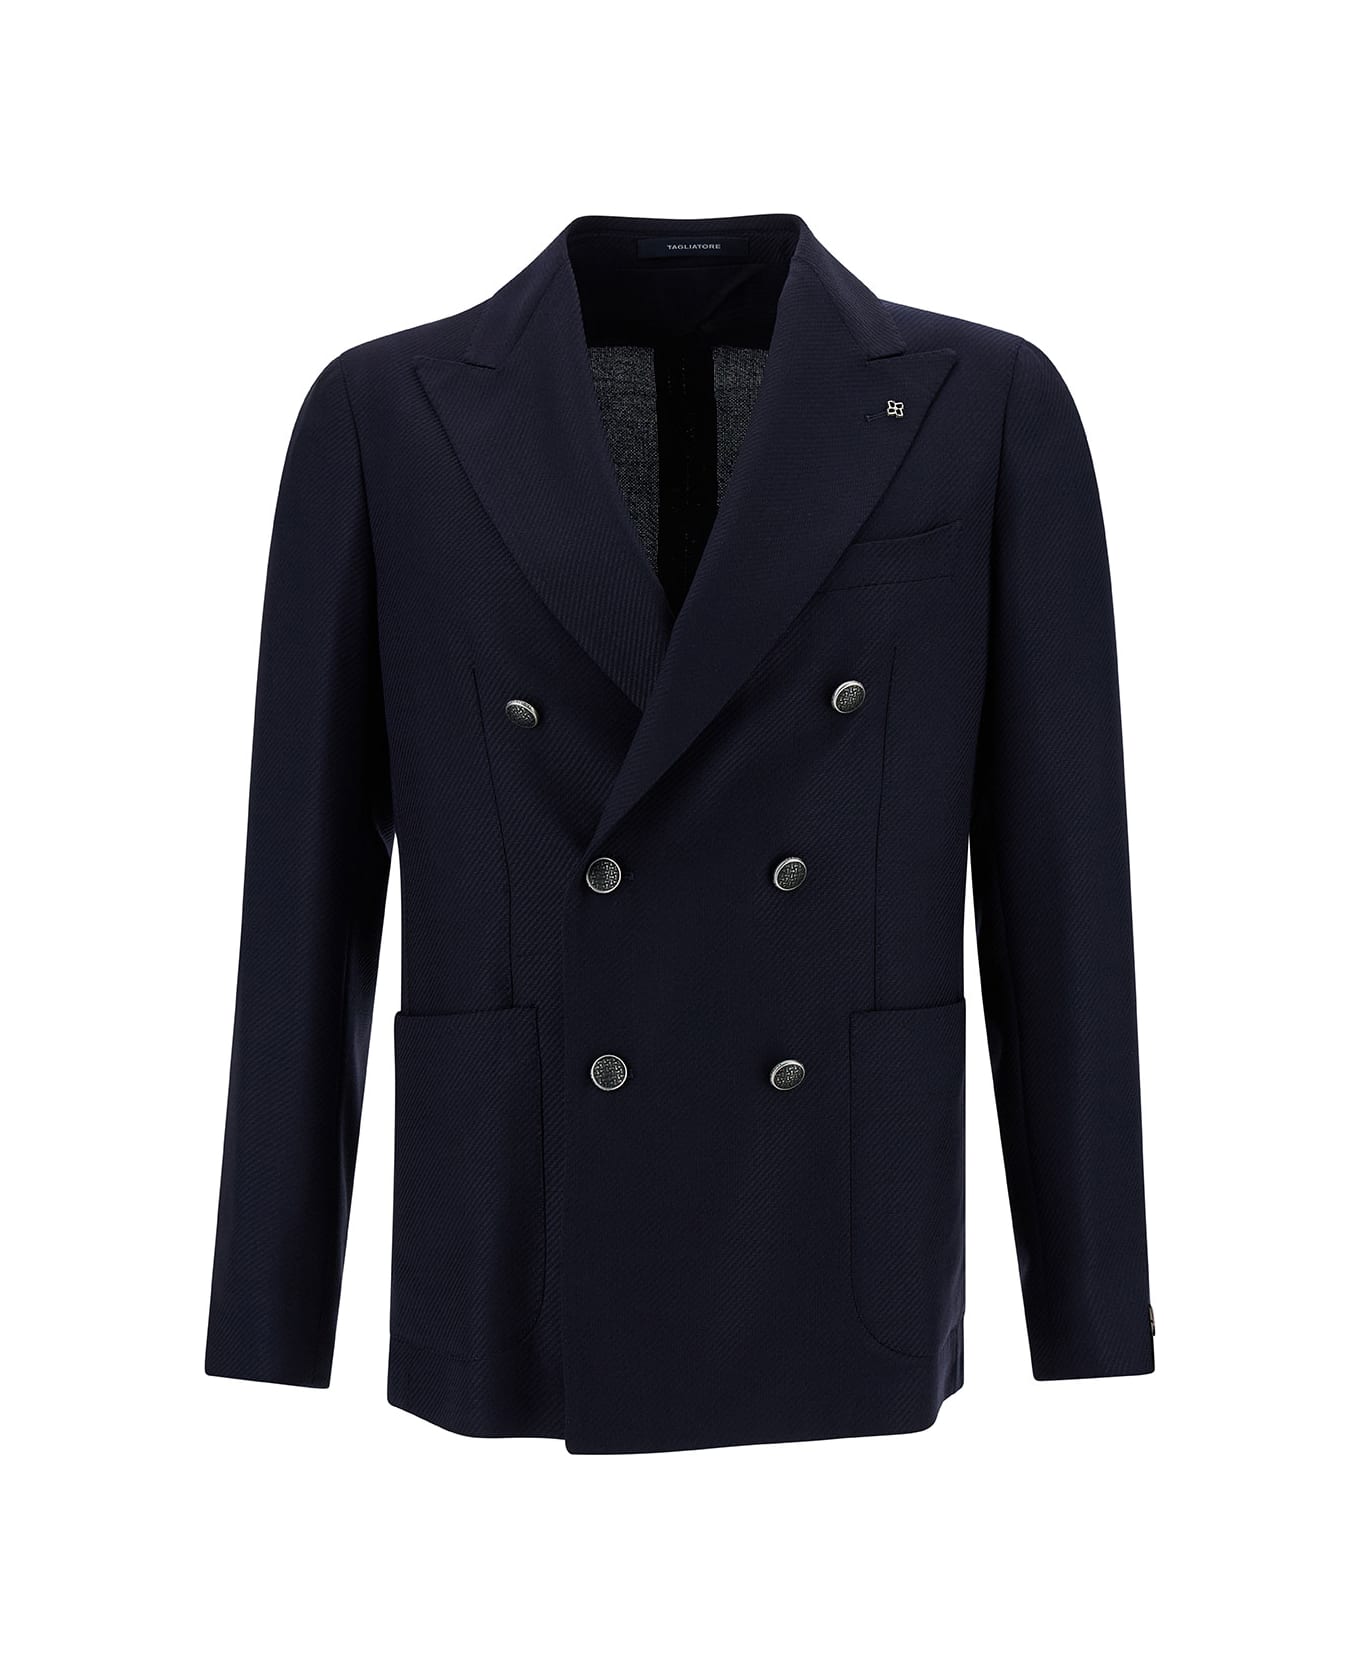 Tagliatore 'montecarlo' Blue Double-breasted Jacket With Silver-colored Buttons In Wool Blend Man - Blu